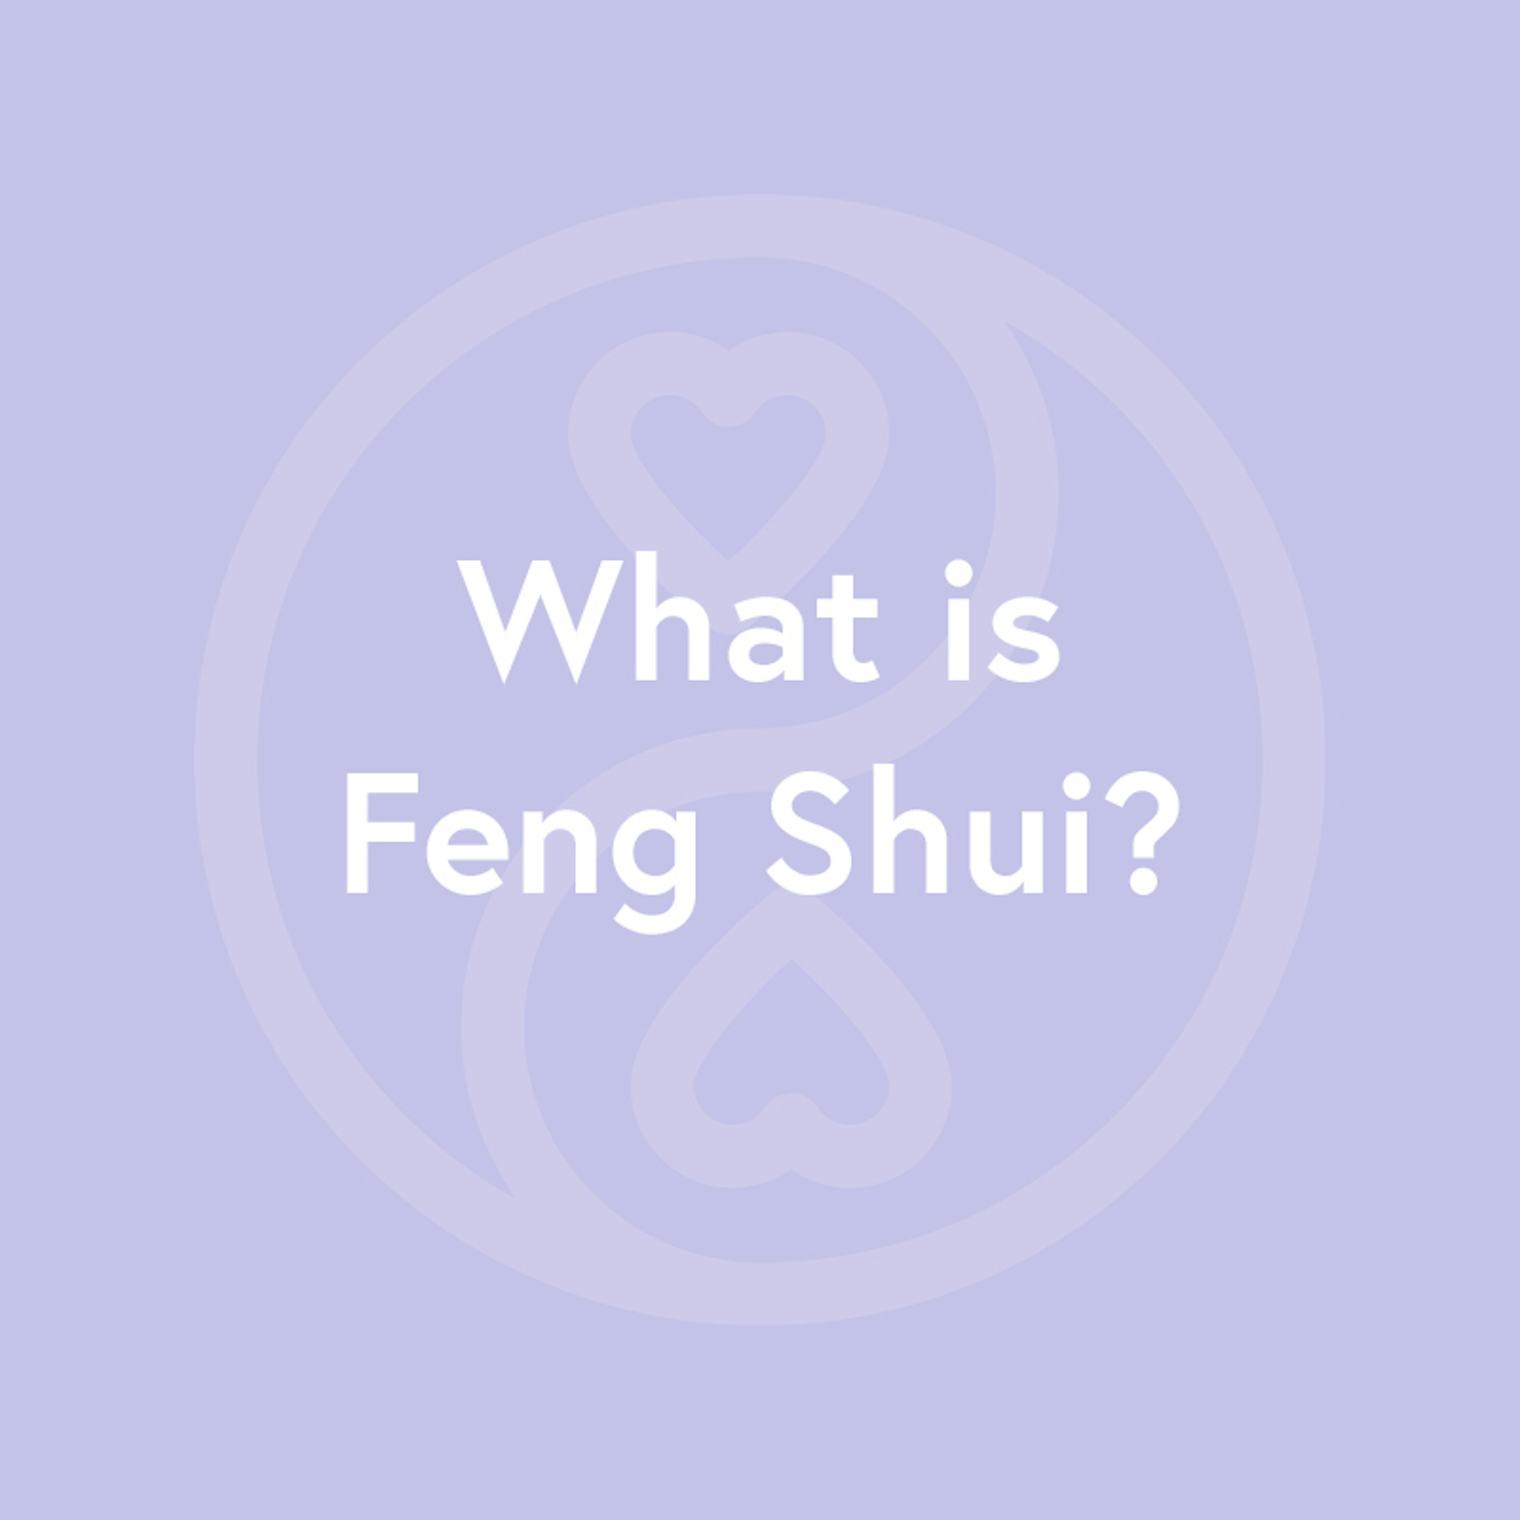 How To Feng Shui Your Home In 5 Easy Steps